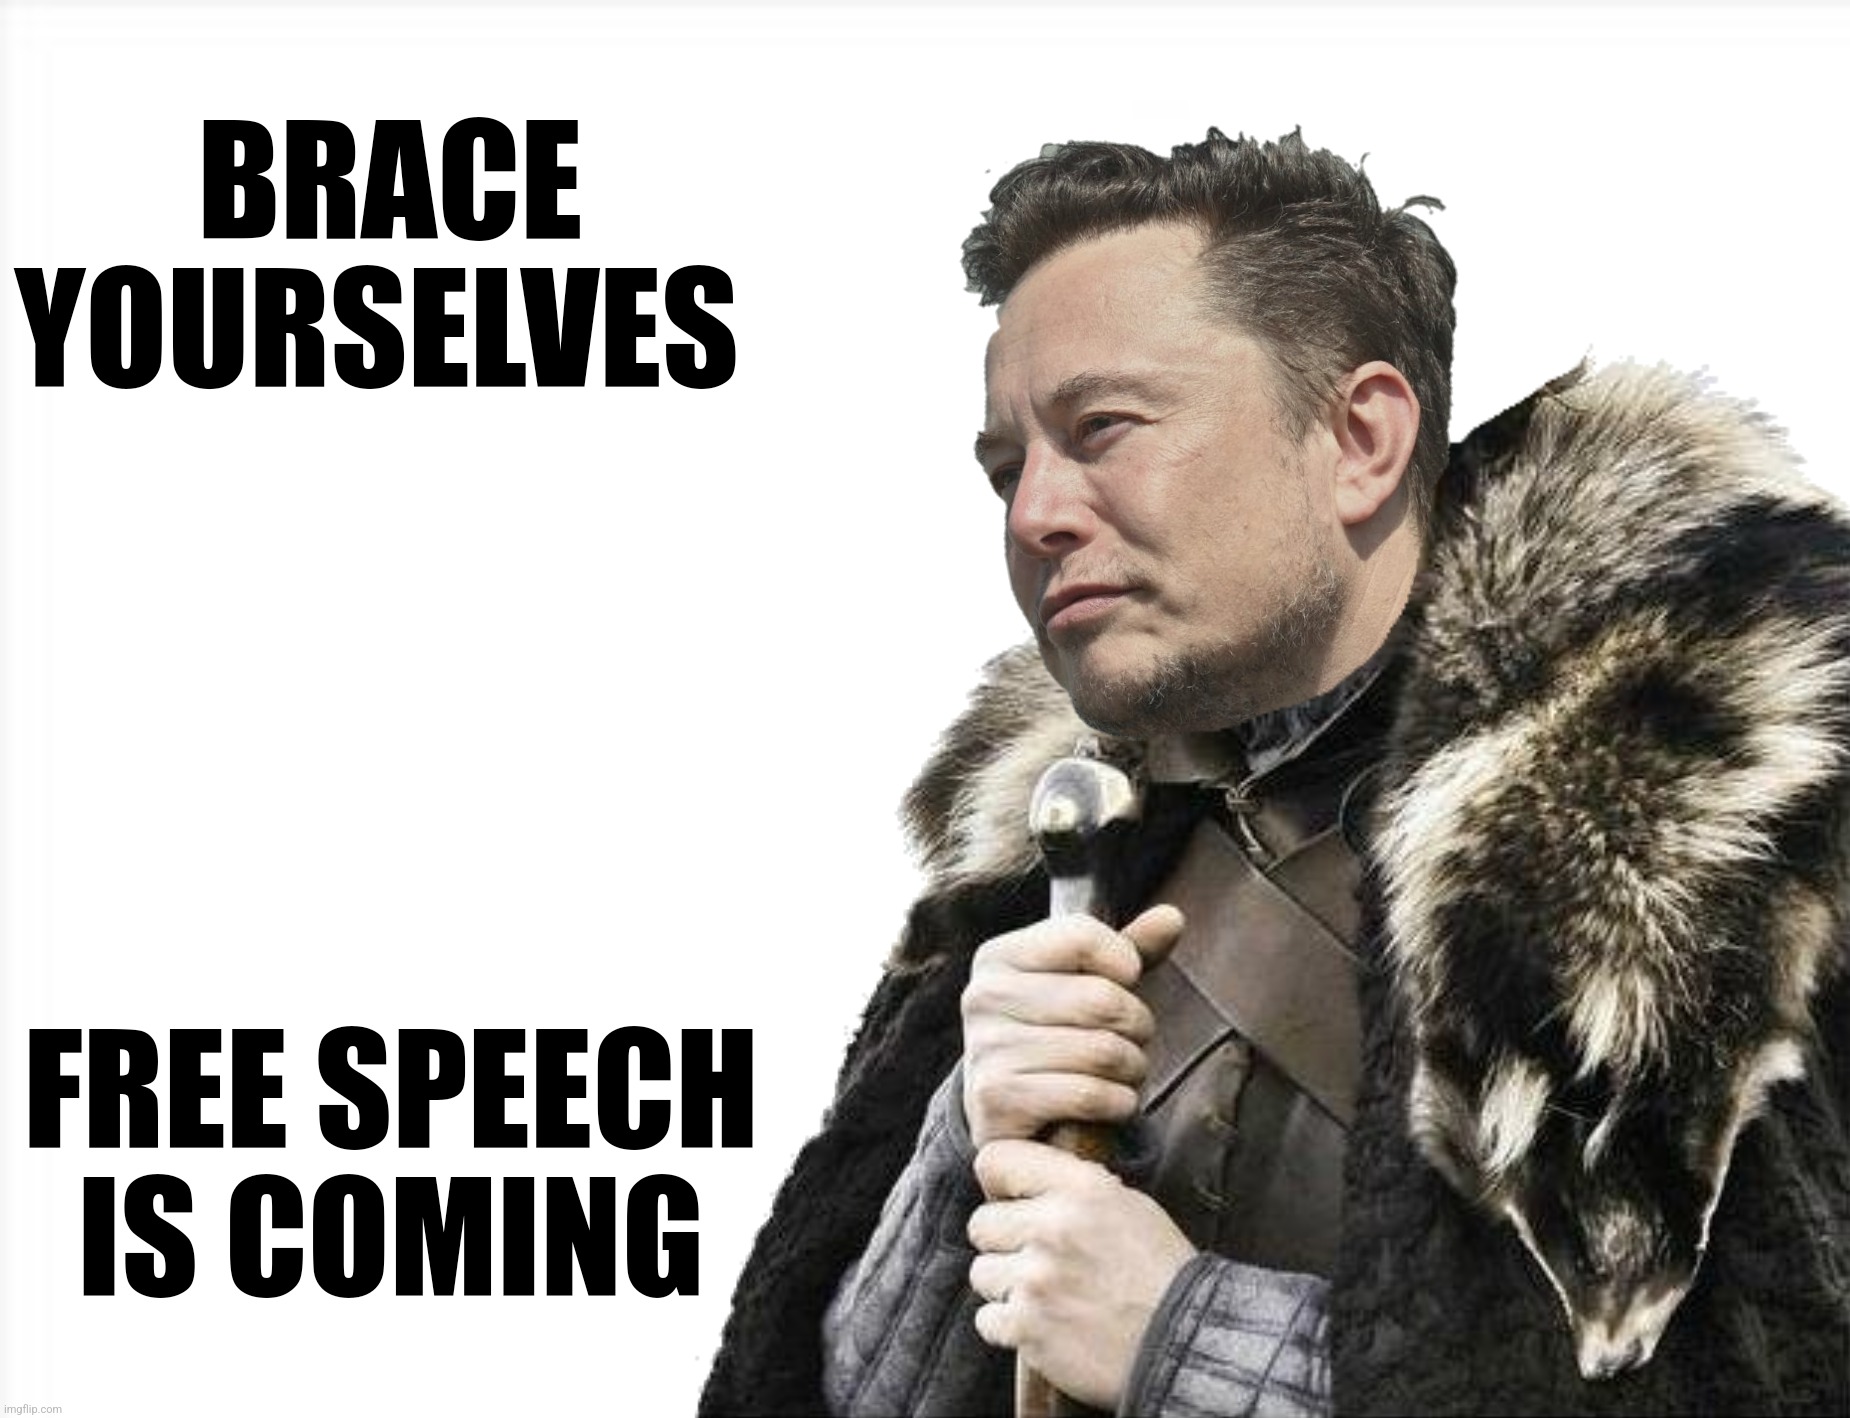 BRACE YOURSELVES FREE SPEECH IS COMING | made w/ Imgflip meme maker